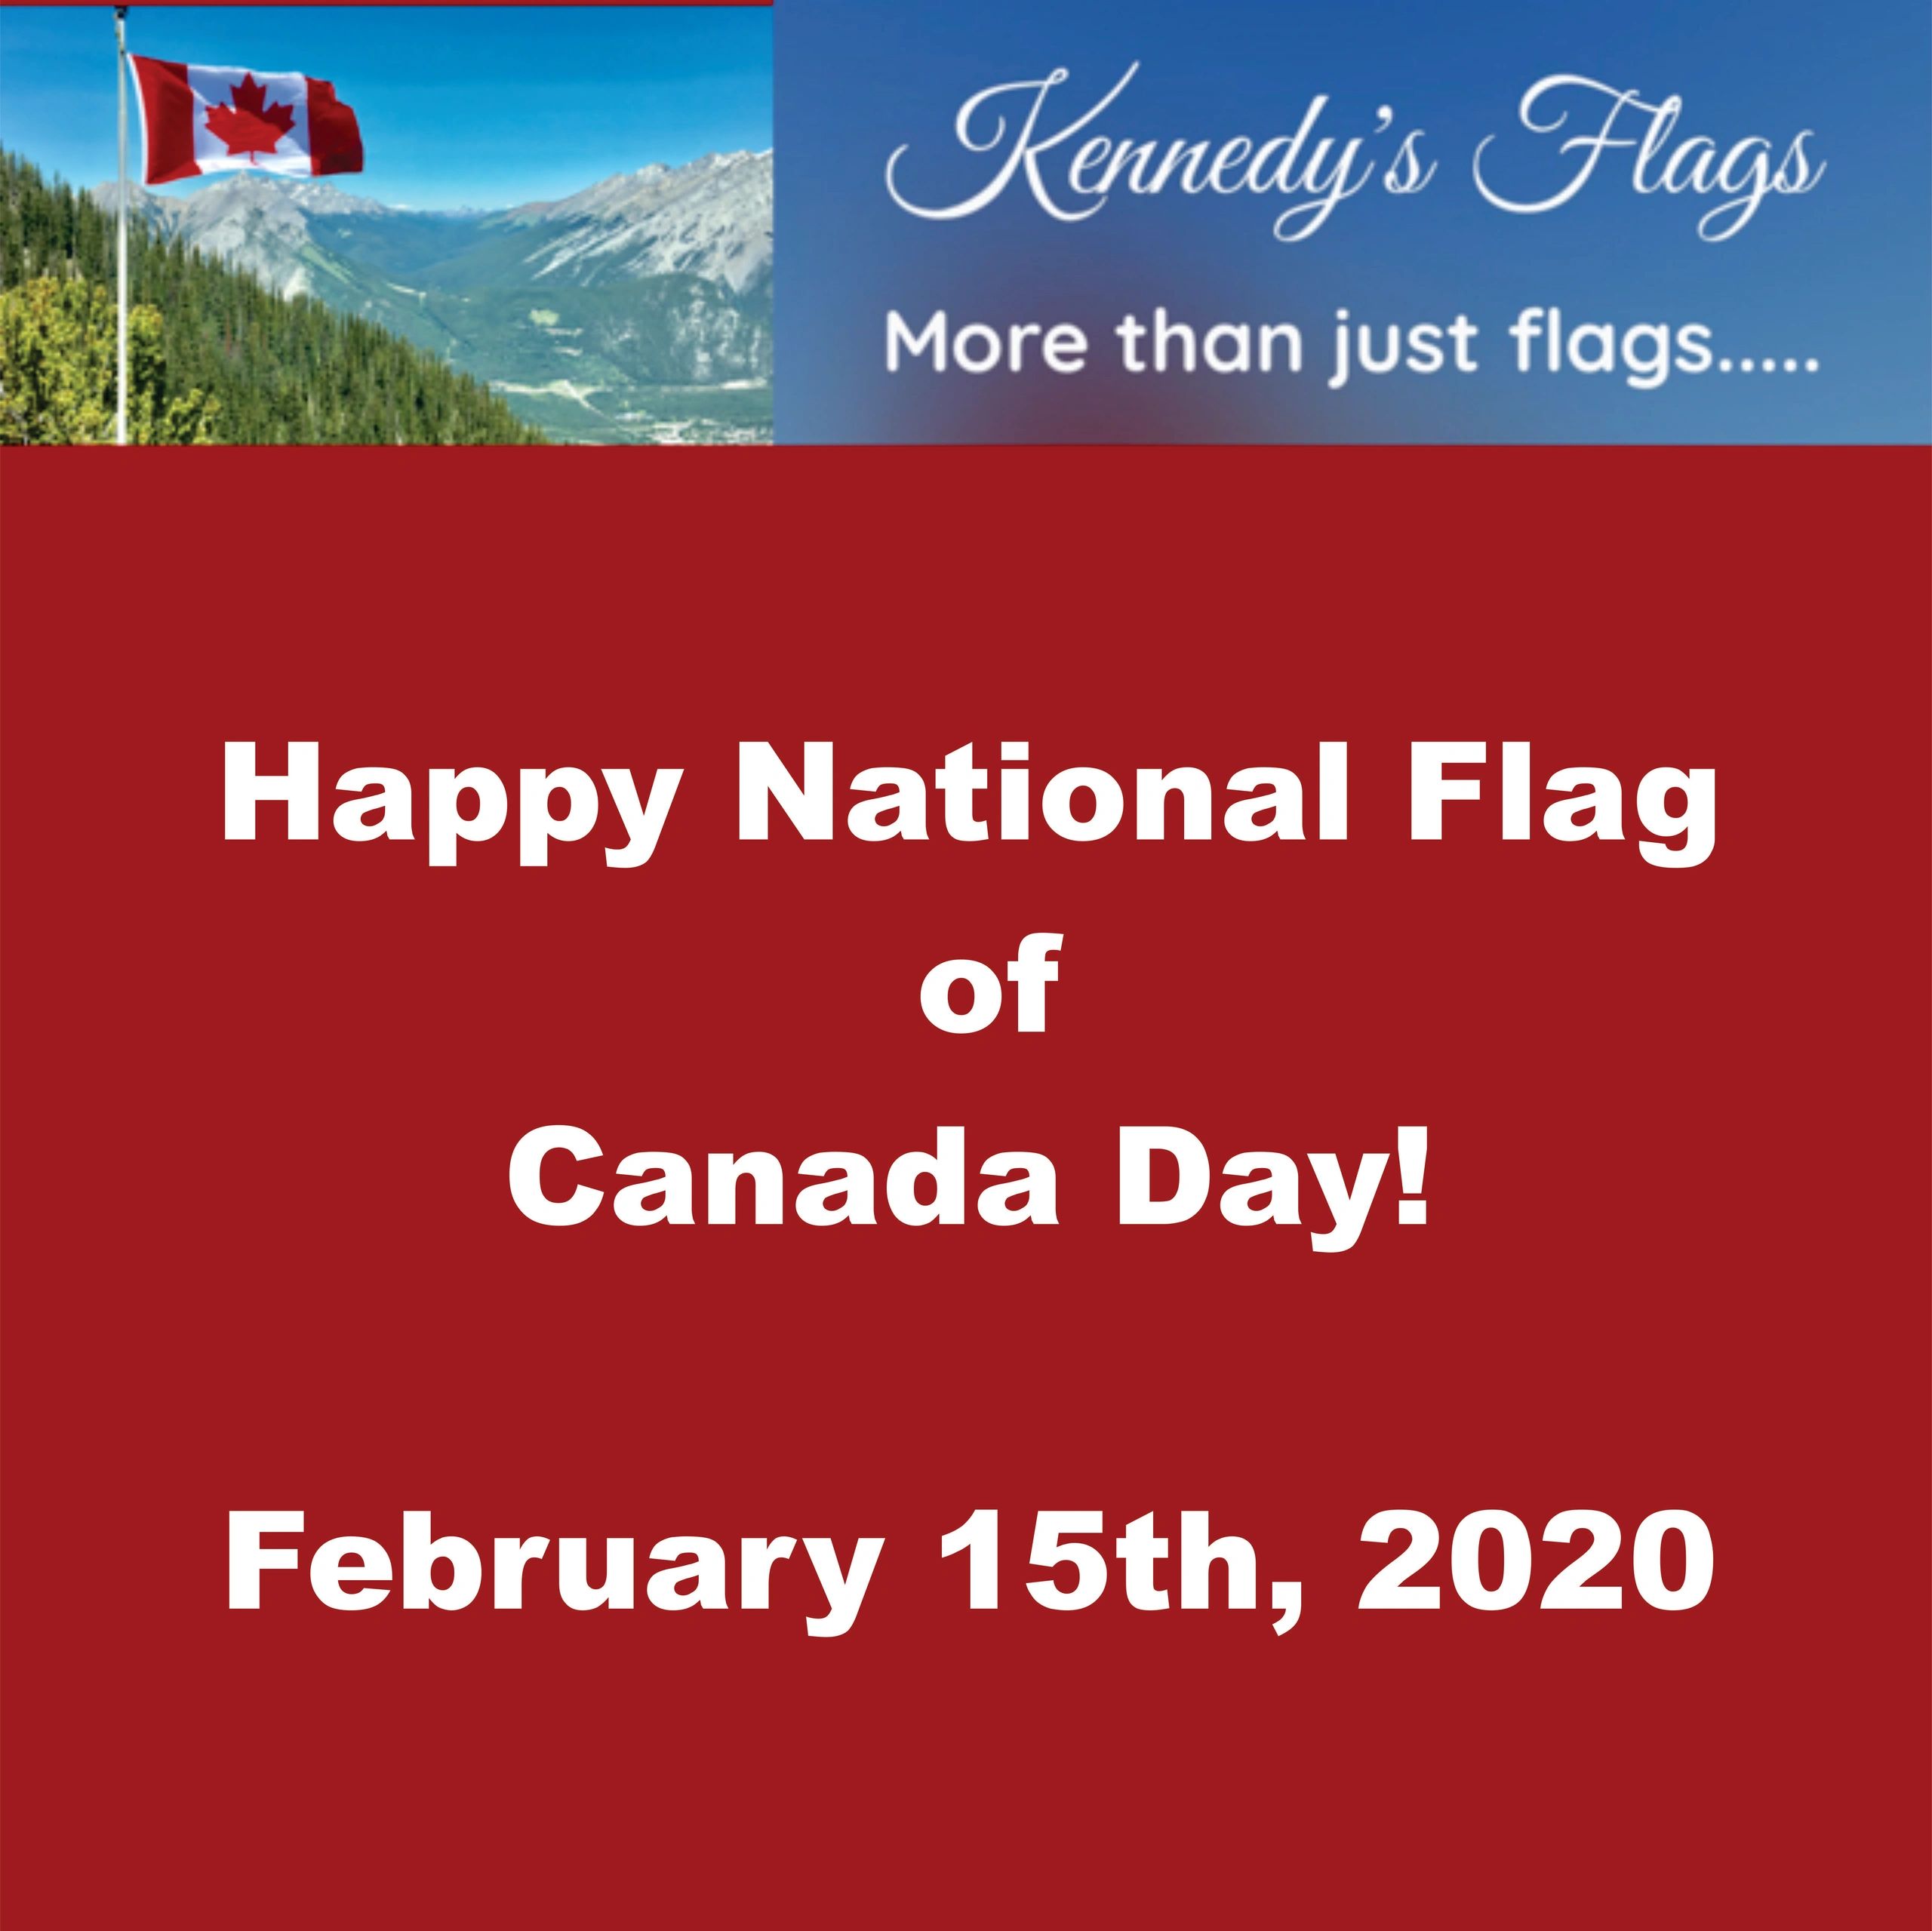 National Flag of Canada Day!